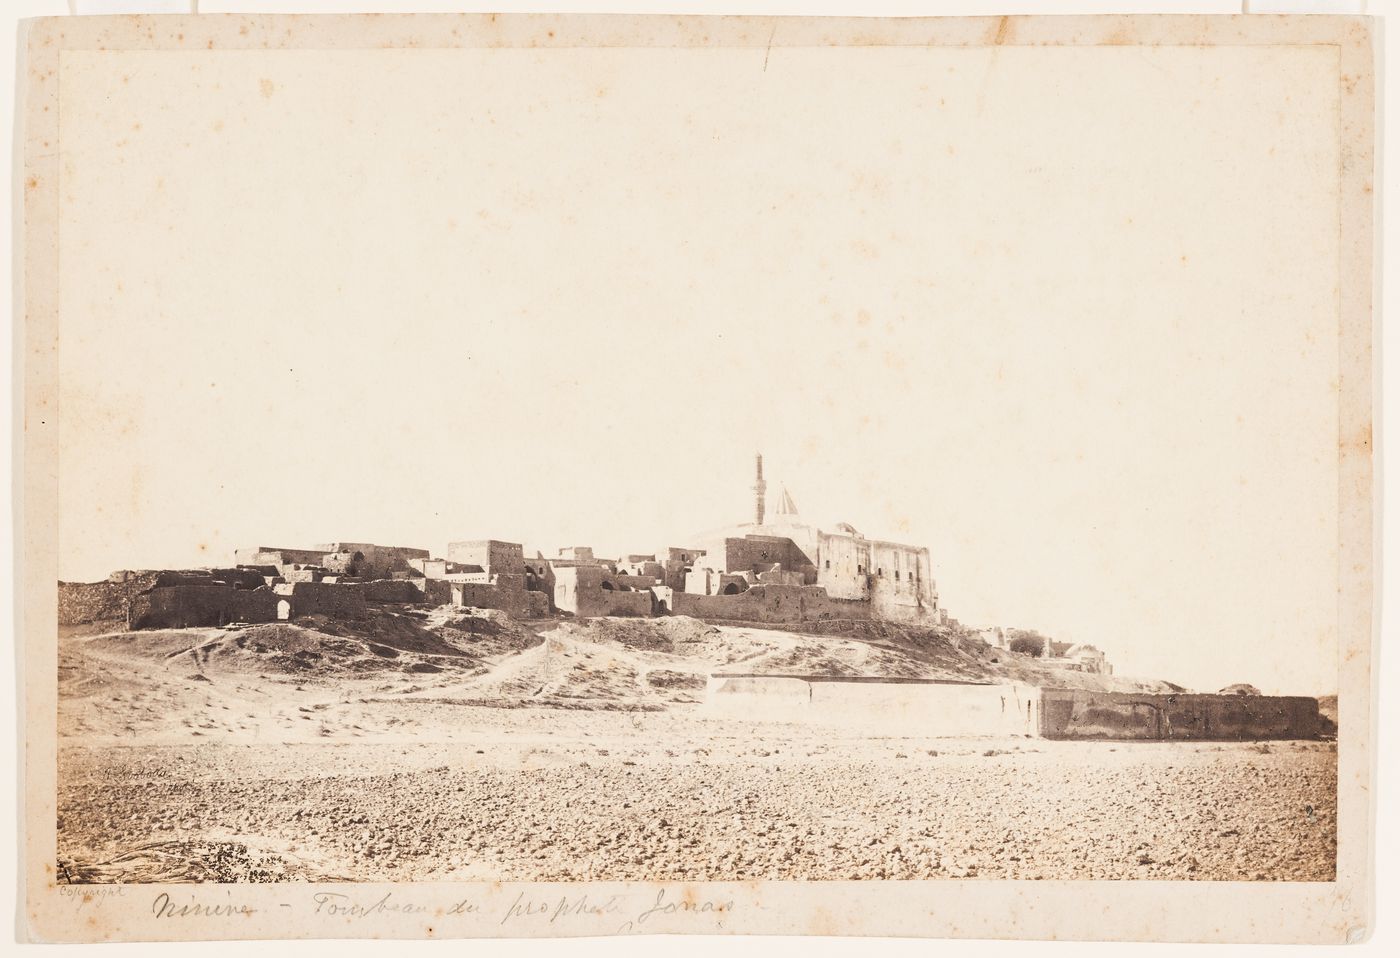 Distant view of the Nebi Yunus [prophet Jonah] (also known as the Shrine of Jonah and the Tomb of prophet Jonas), Nineve (now Nineveh), Ottoman Empire (now in Iraq)